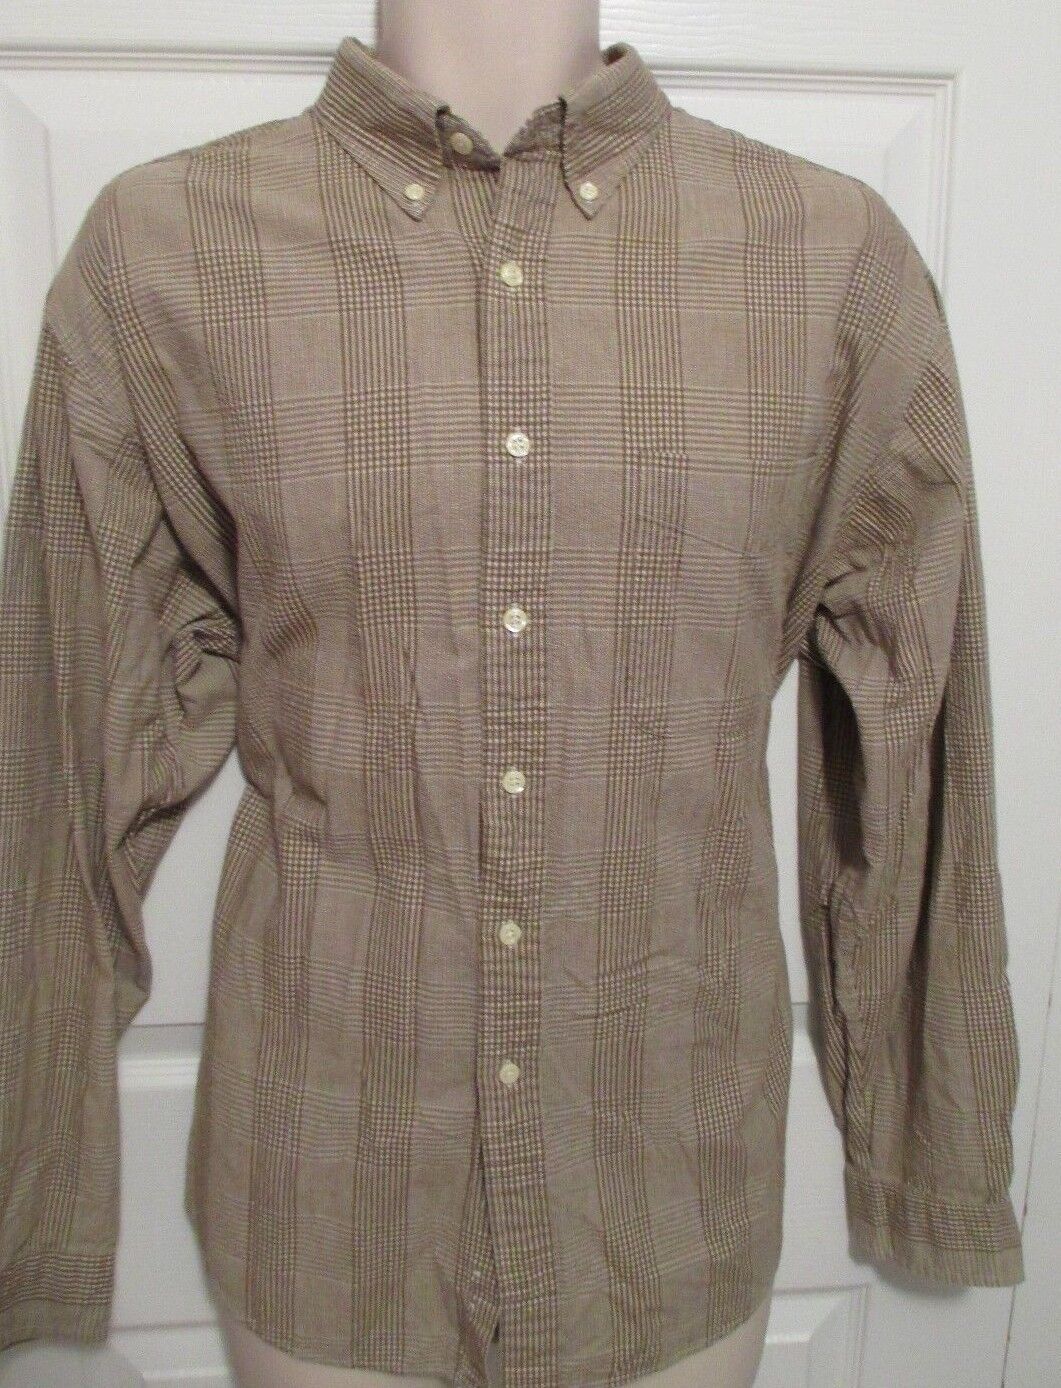 Primary image for J Crew Cotton Men’s Brown & White Plaid Shirt, Size Large, Long Sleeve 